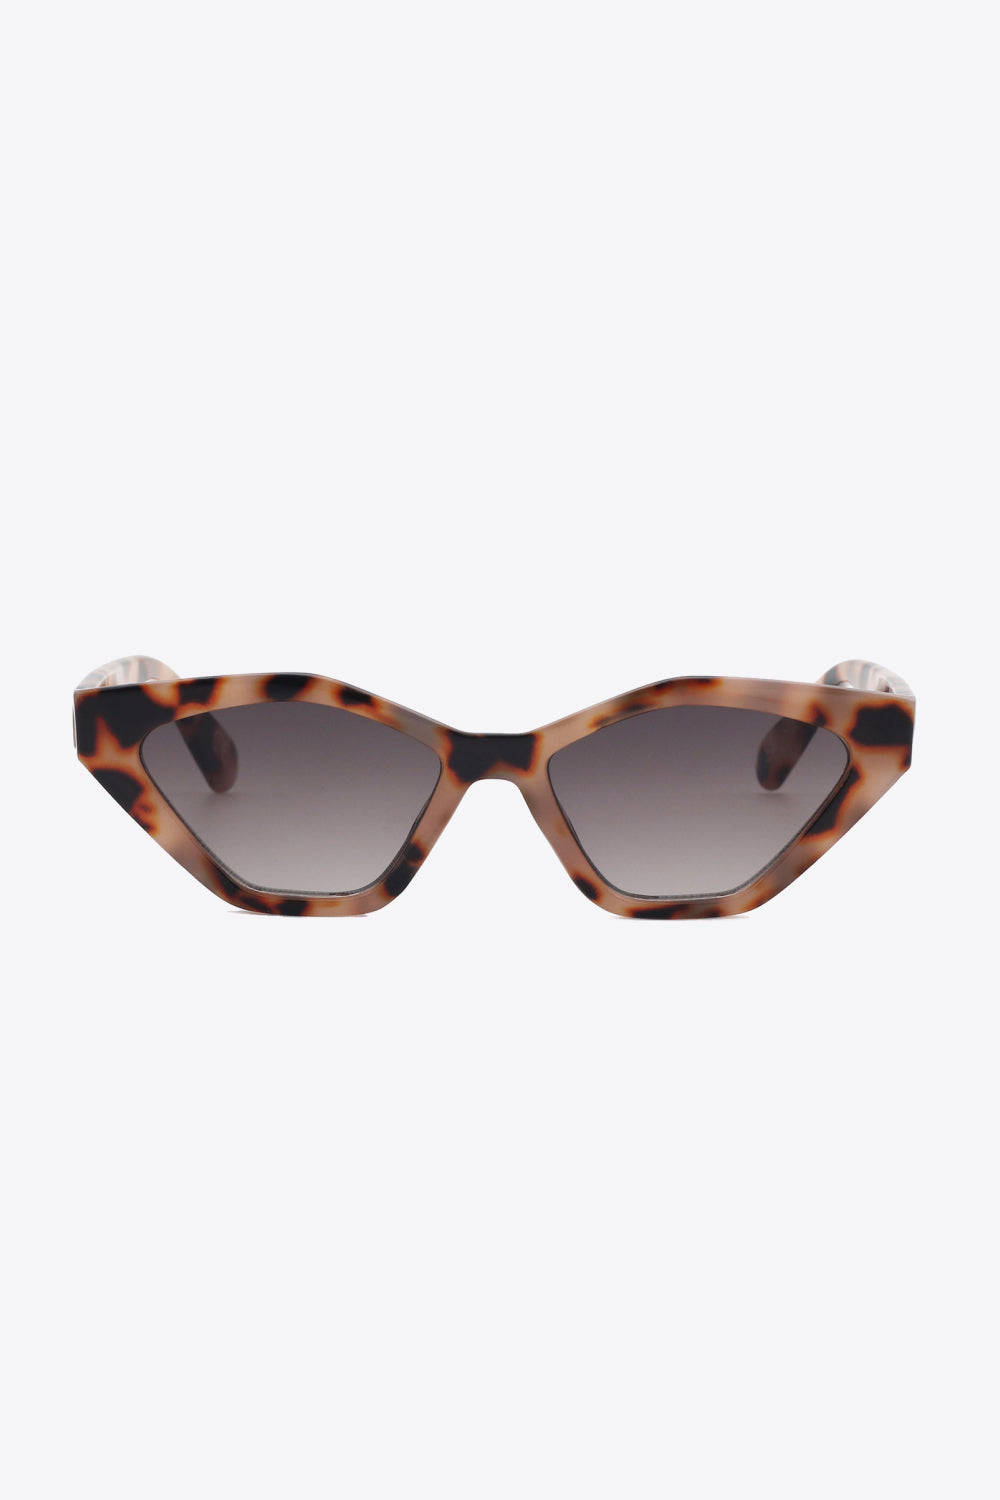 Cat Eye Polycarbonate Sunglasses Print on any thing USA/STOD clothes